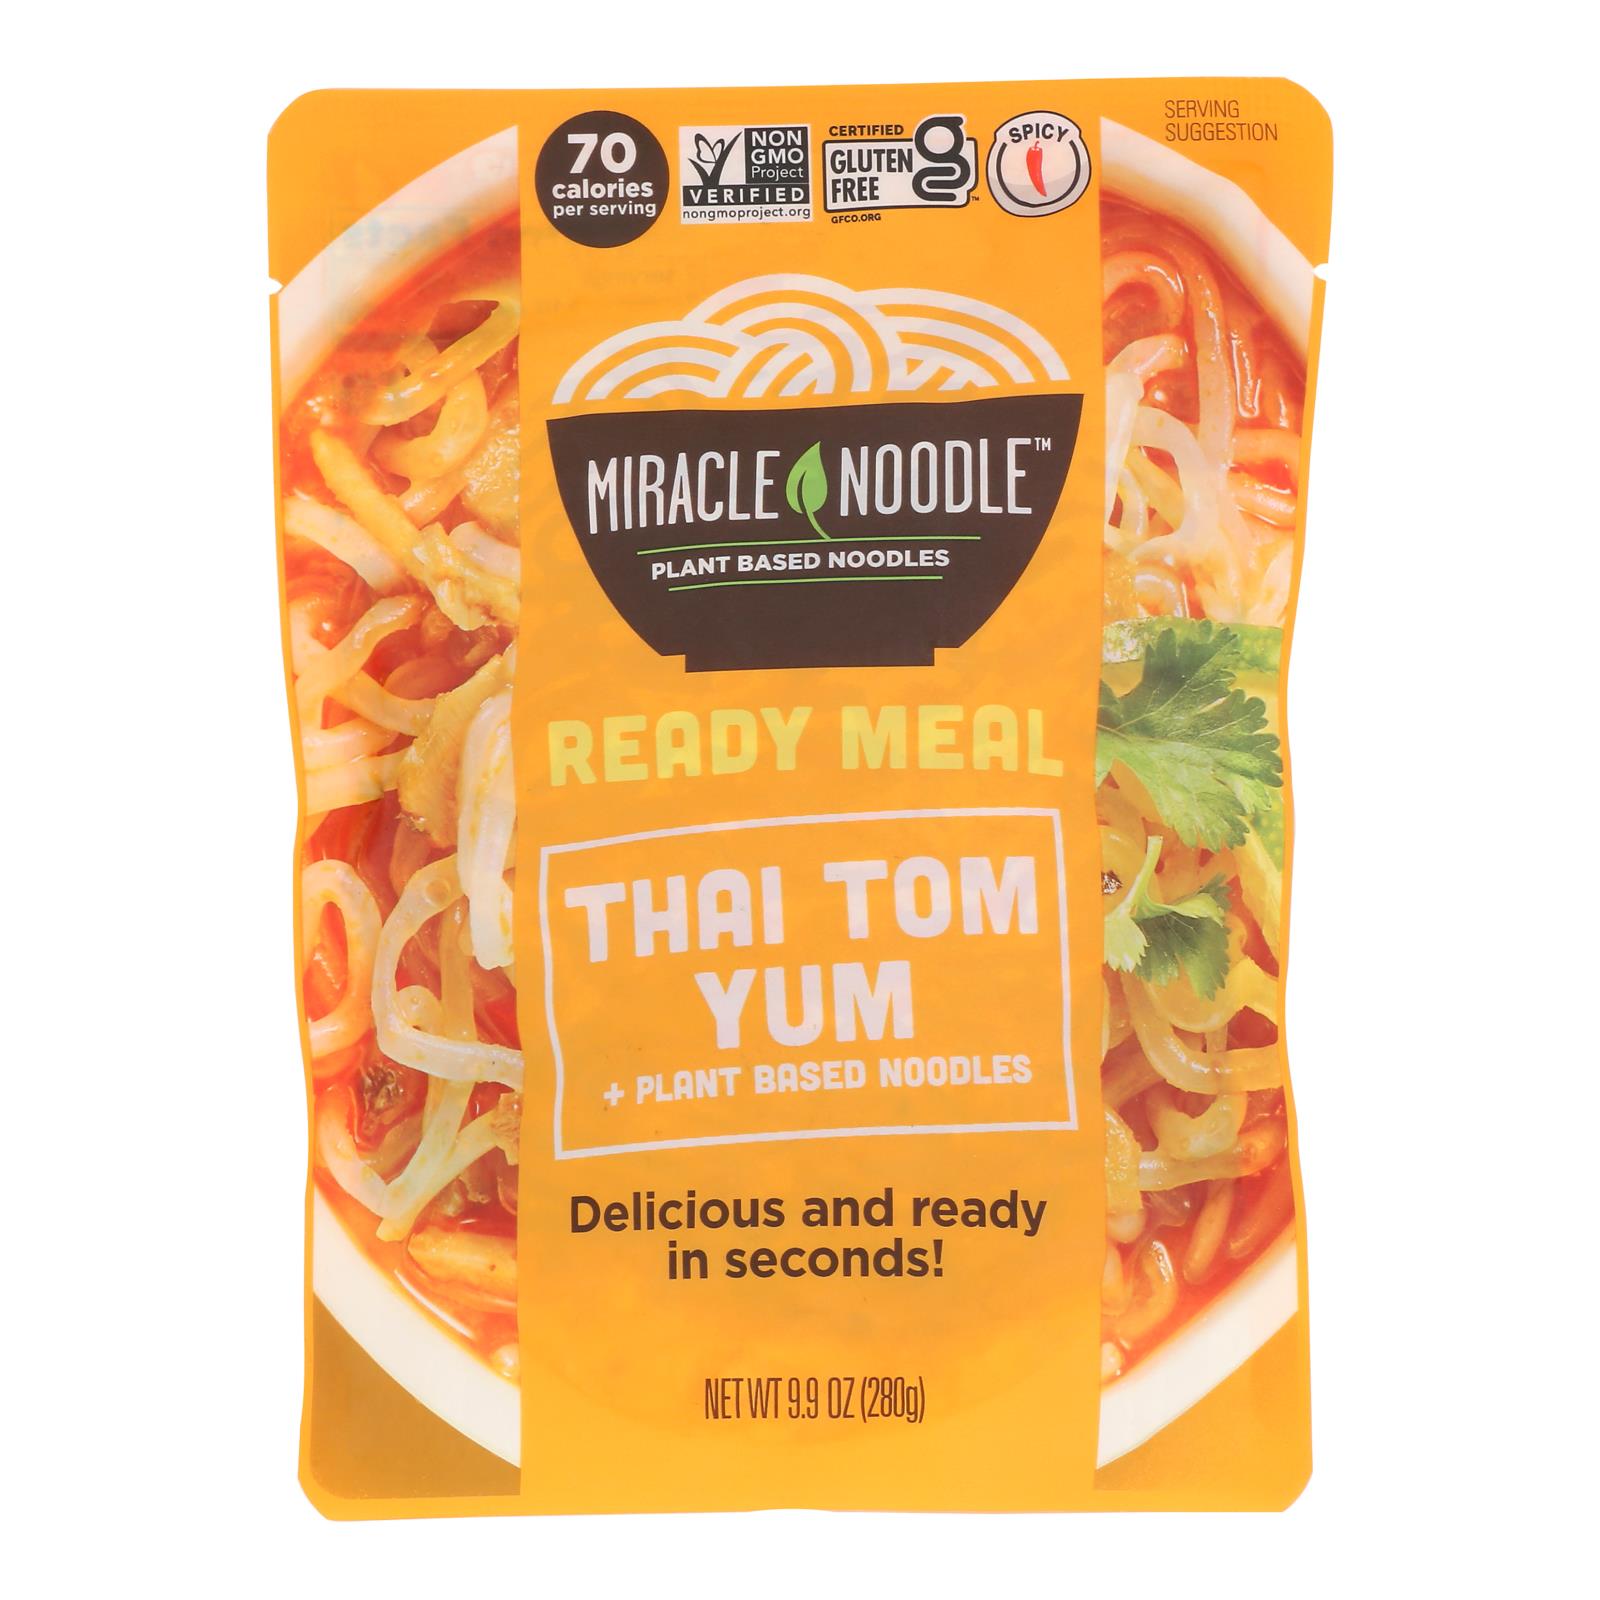 Miracle Noodle - Rte Meal Thai Tom Yum - Case of 6-9.9 OZ